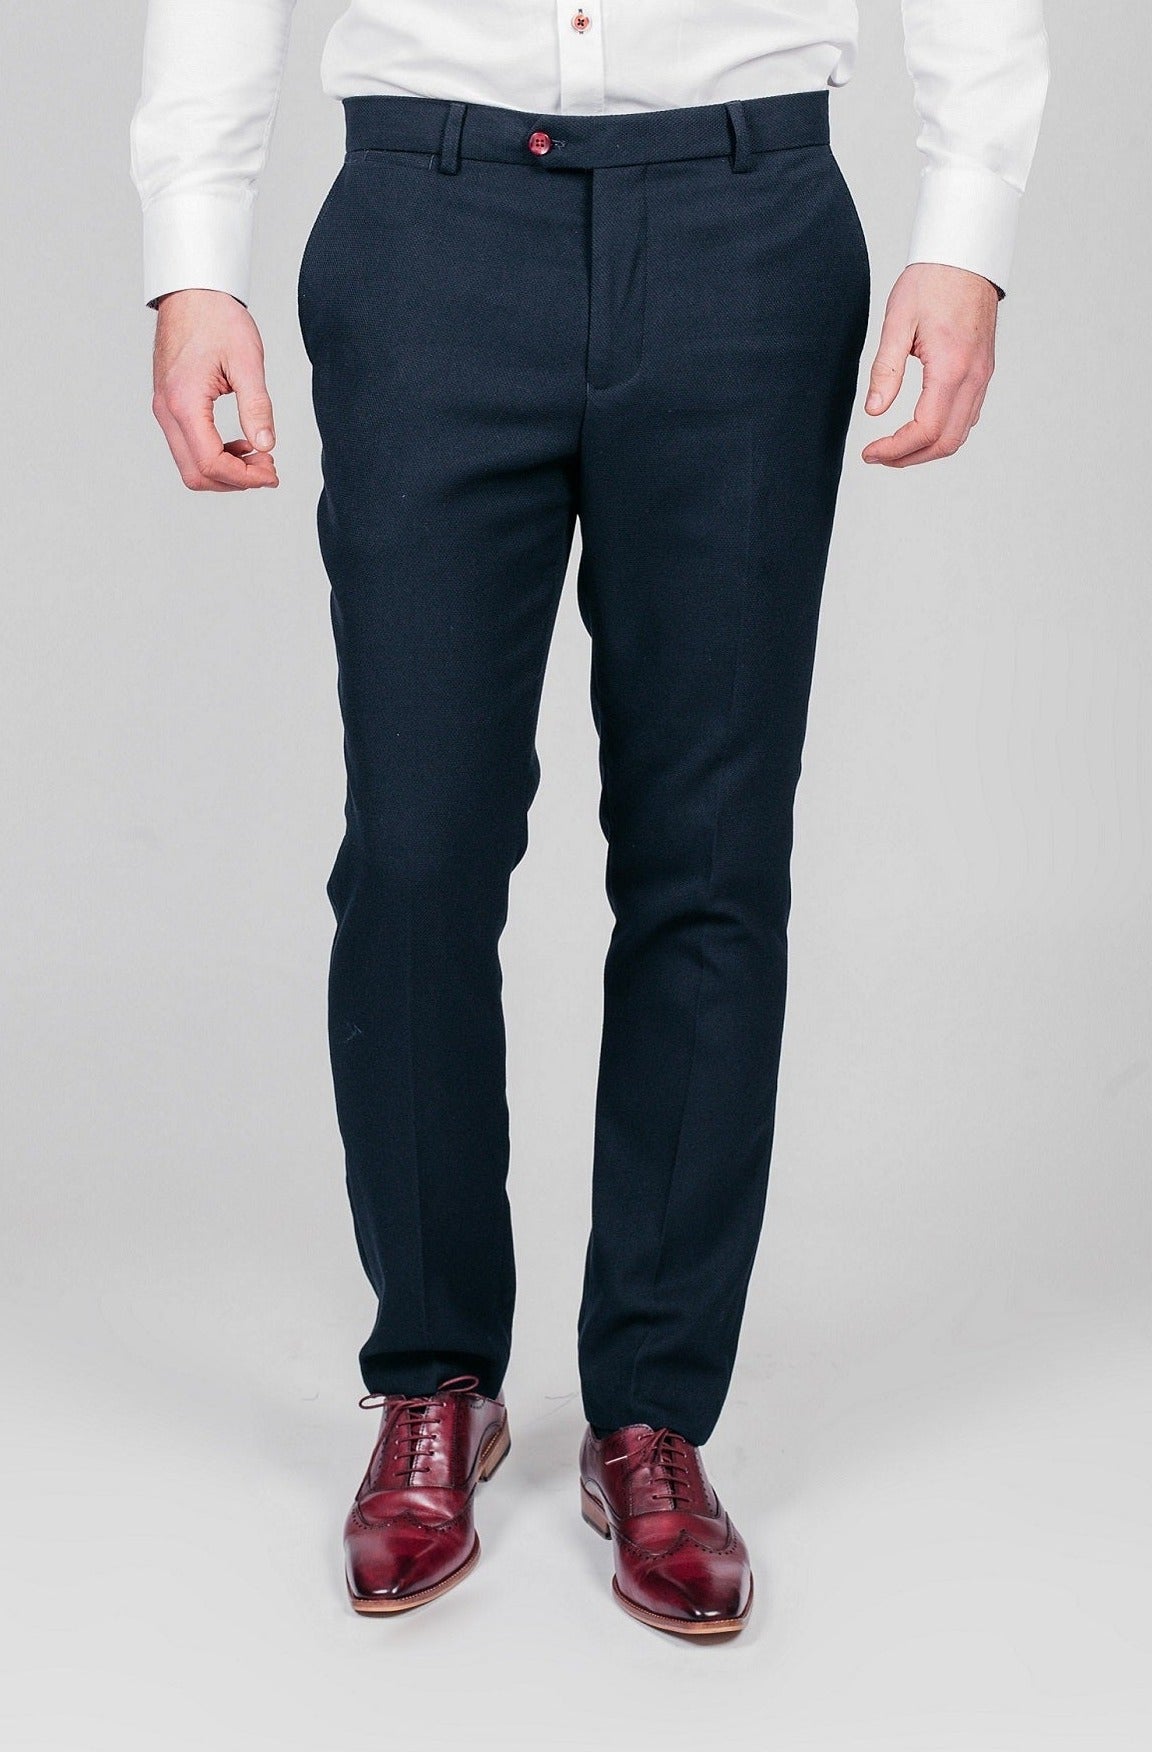 Marc Darcy JD4 Navy Flat Front Slim Fit Trousers